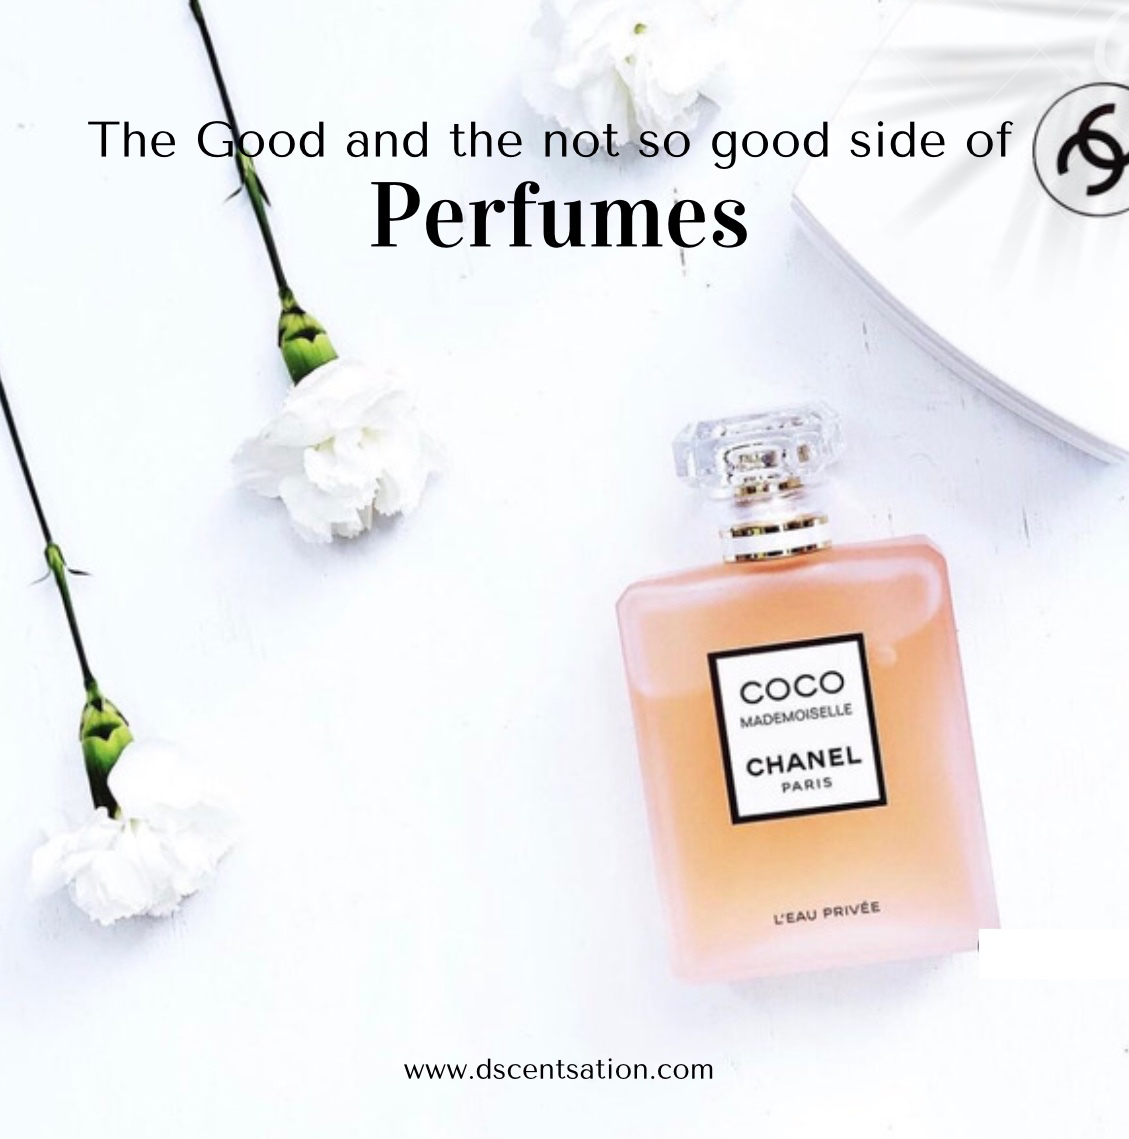 PERFUMES: The good and the not-so-good side